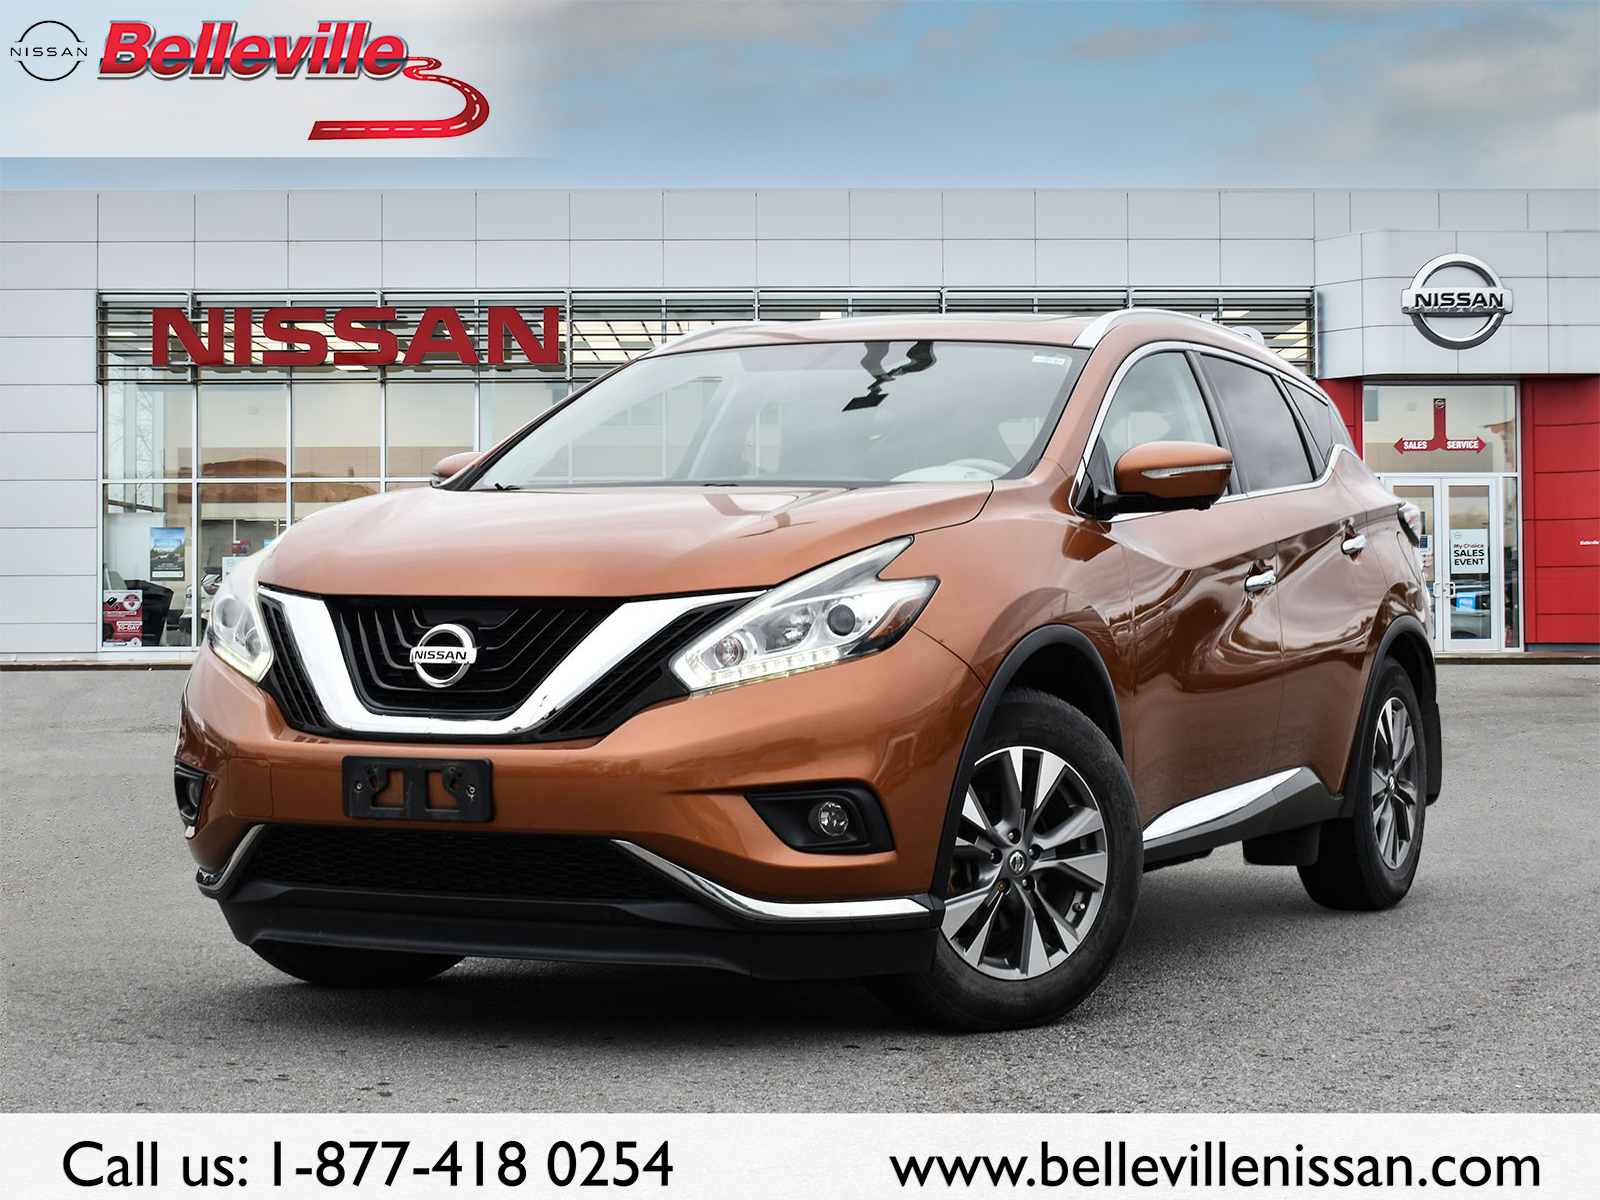 2015 Nissan Murano SL, LEATHER, ROOF, NAV AND MUCH MORE!